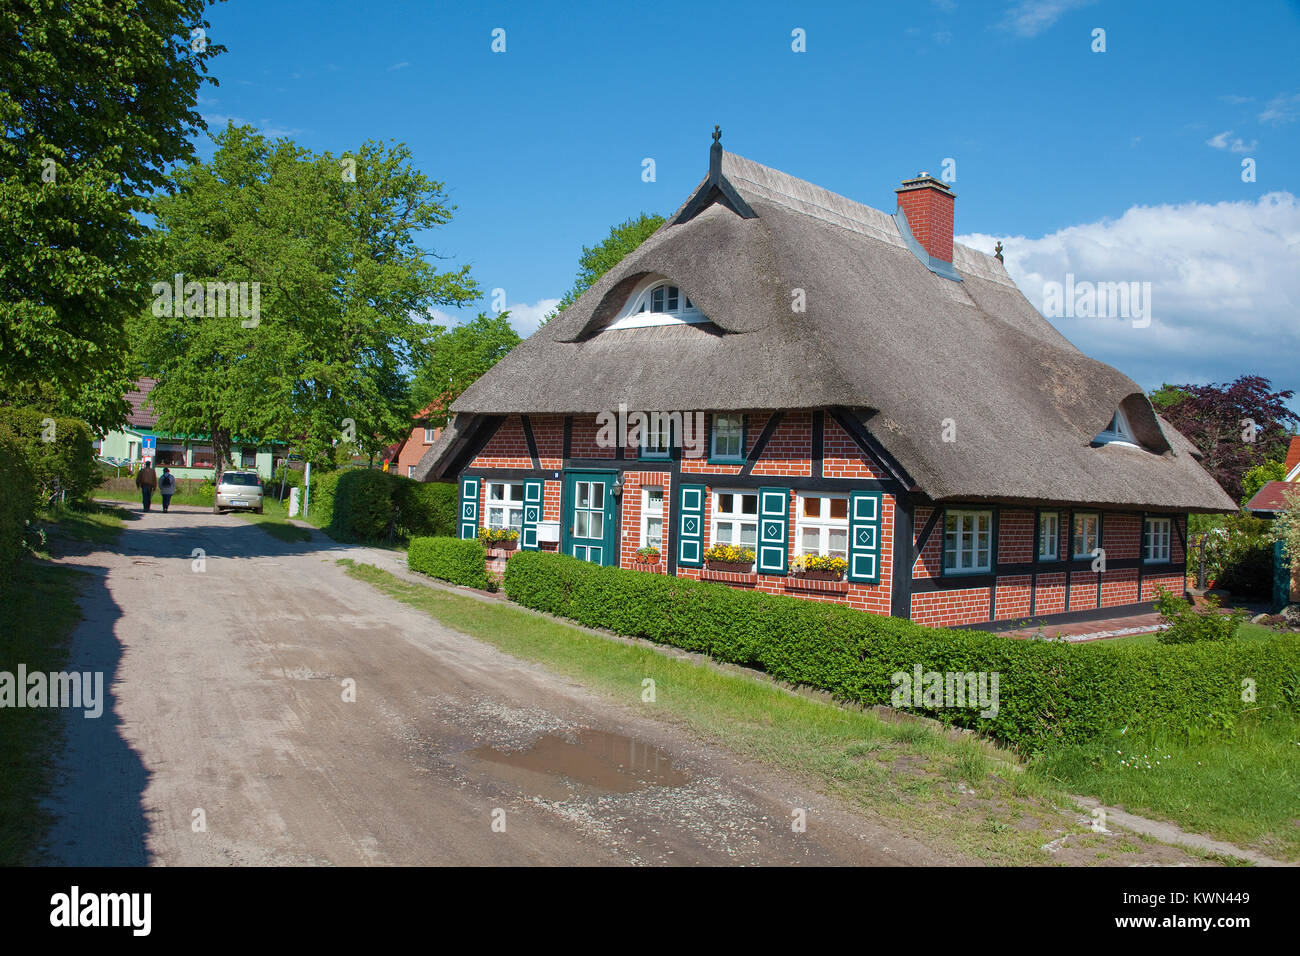 Typical thatched-roof house at Wustrow, Fishland, Mecklenburg-Western Pomerania, Baltic sea, Germany, Europe Stock Photo